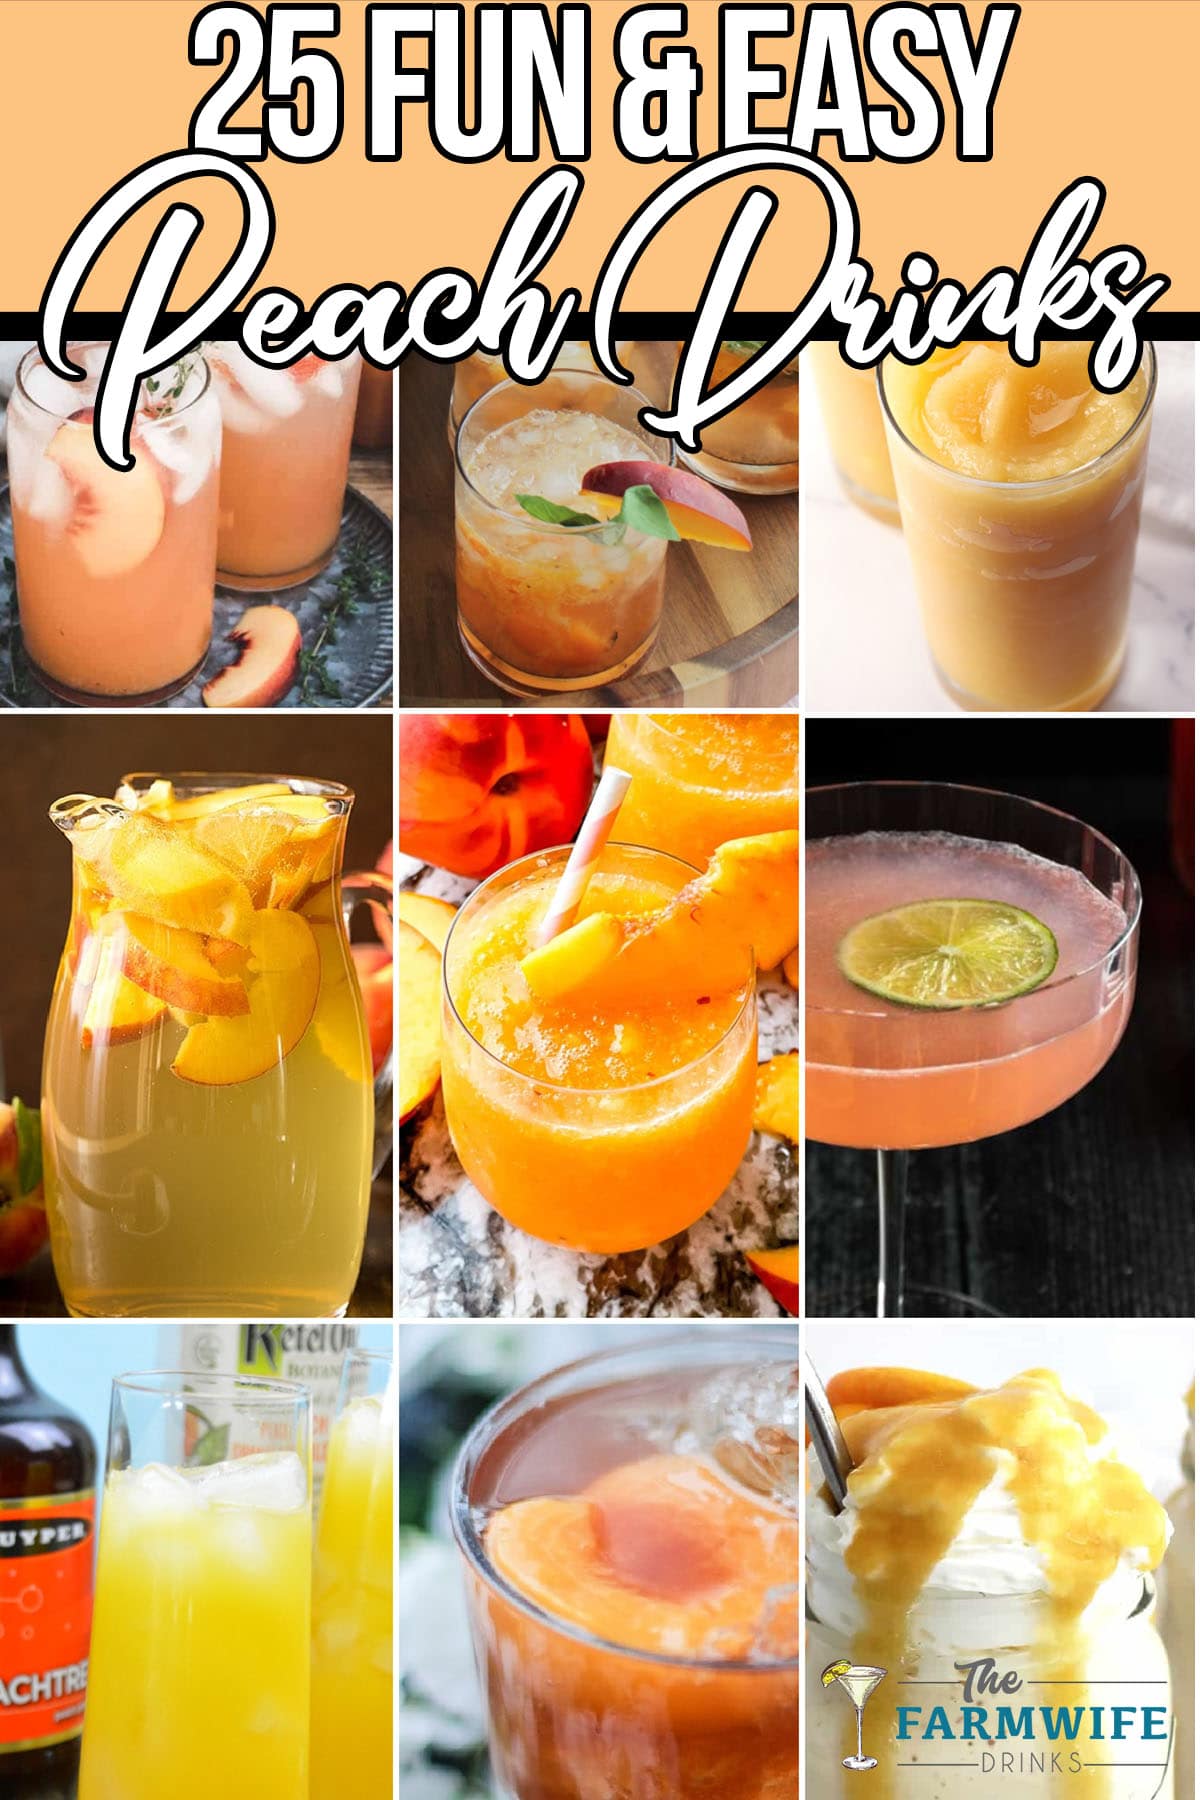 photo collage of easy recipes for peach drinks with text which reads 25 fun and easy peach drinks